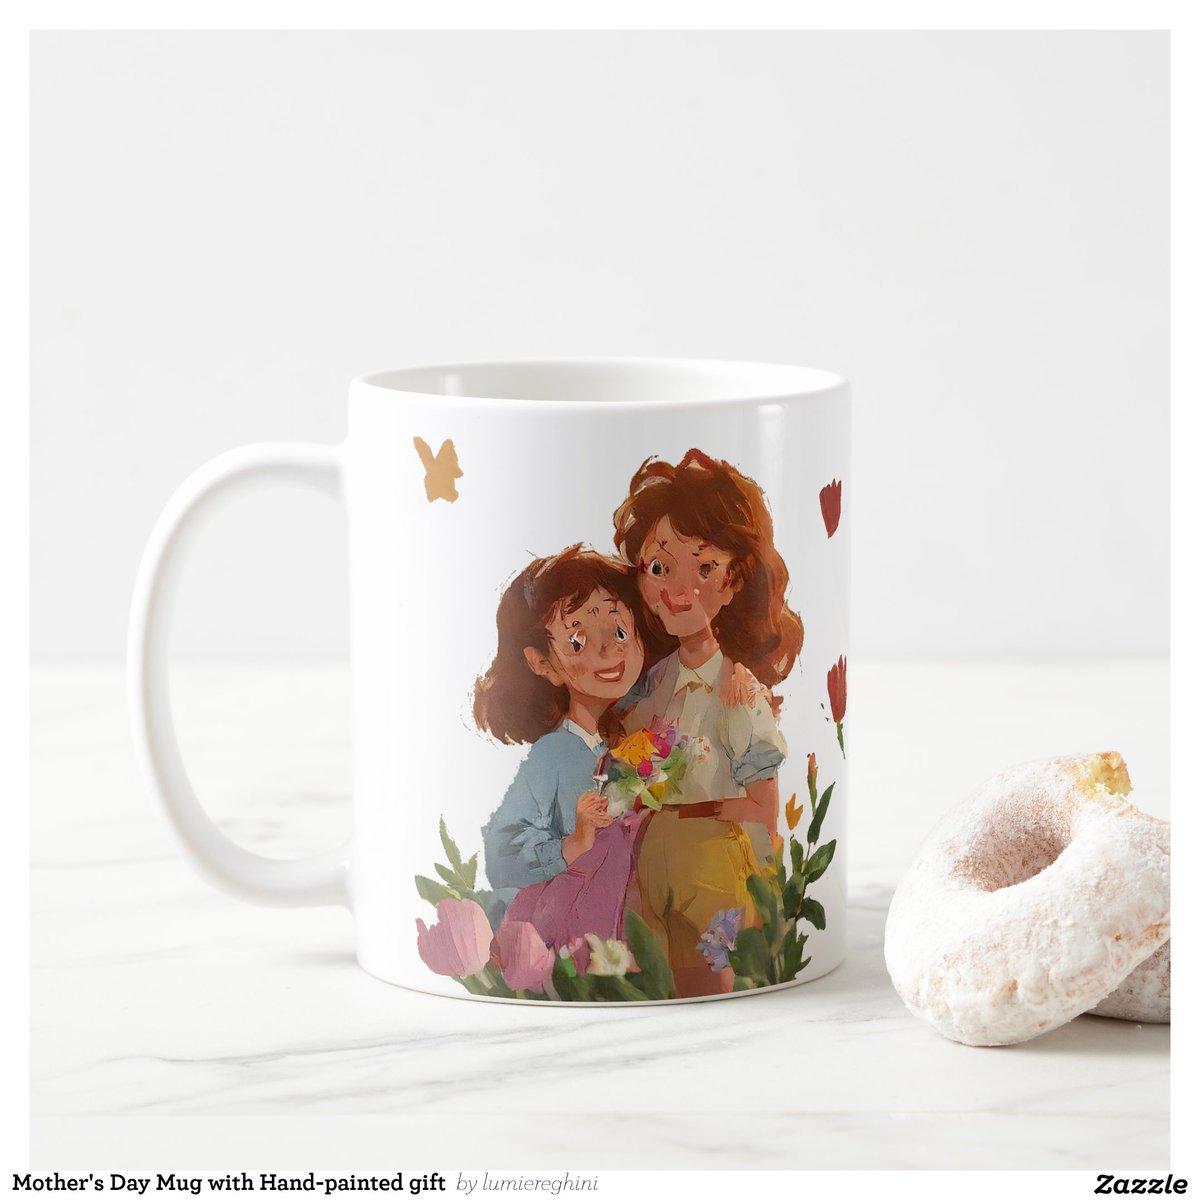 👩‍👧‍👦 Capture the love between mother and child! 👩‍👧‍👦 🍉🤞 Our hand-painted mug is the perfect gift for Mom this Mother's Day. Personalize with your names for an extra special touch. Order now! #MotherChildBond #PersonalizedMug #HandpaintedArt zazzle.com/z/iri8y1wd?rf=…